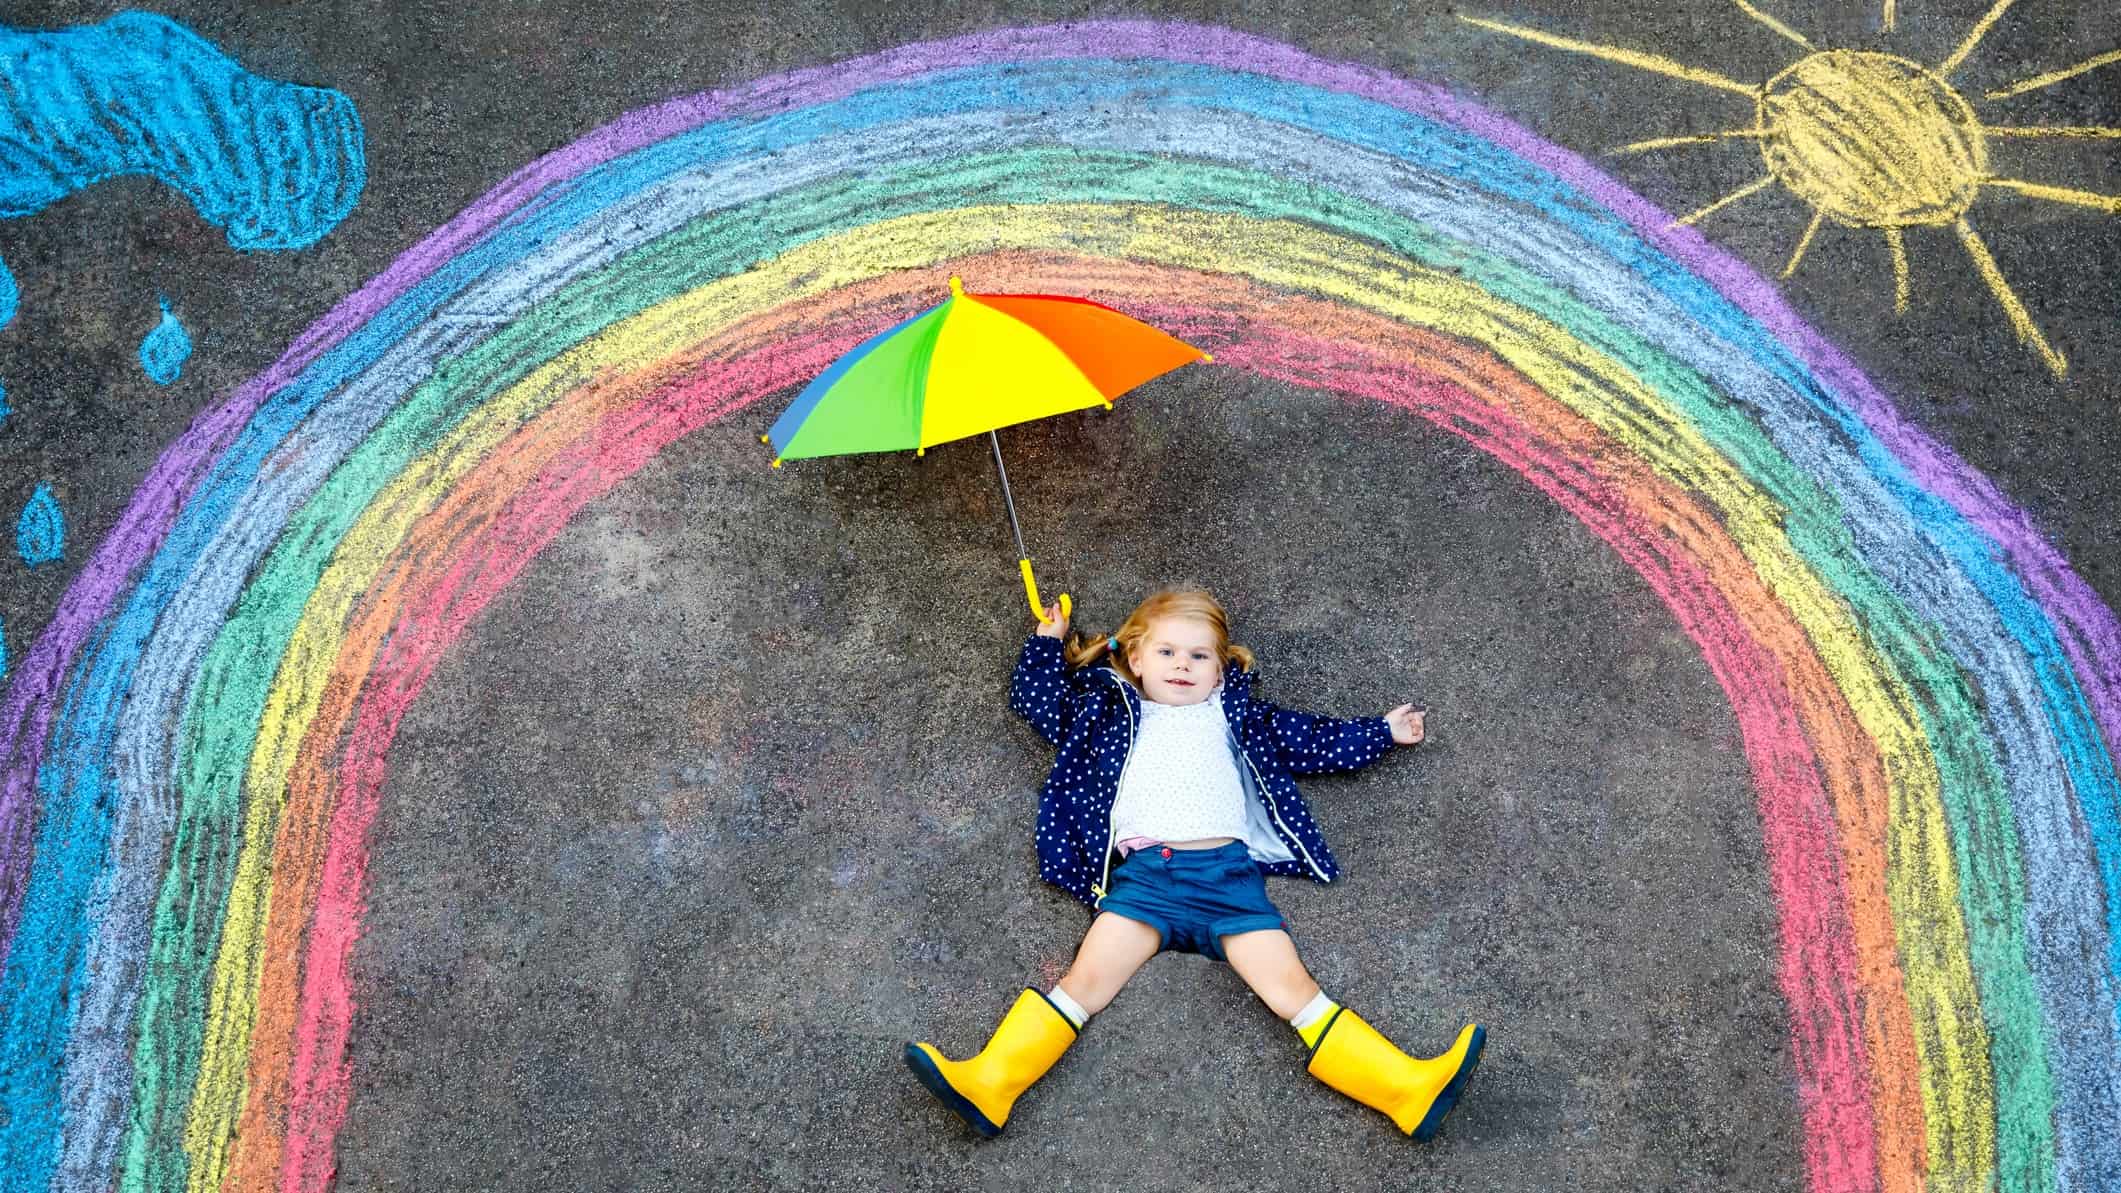 A little girl holds a colourful umbrella under a chalk rainbow drawn on the ground.